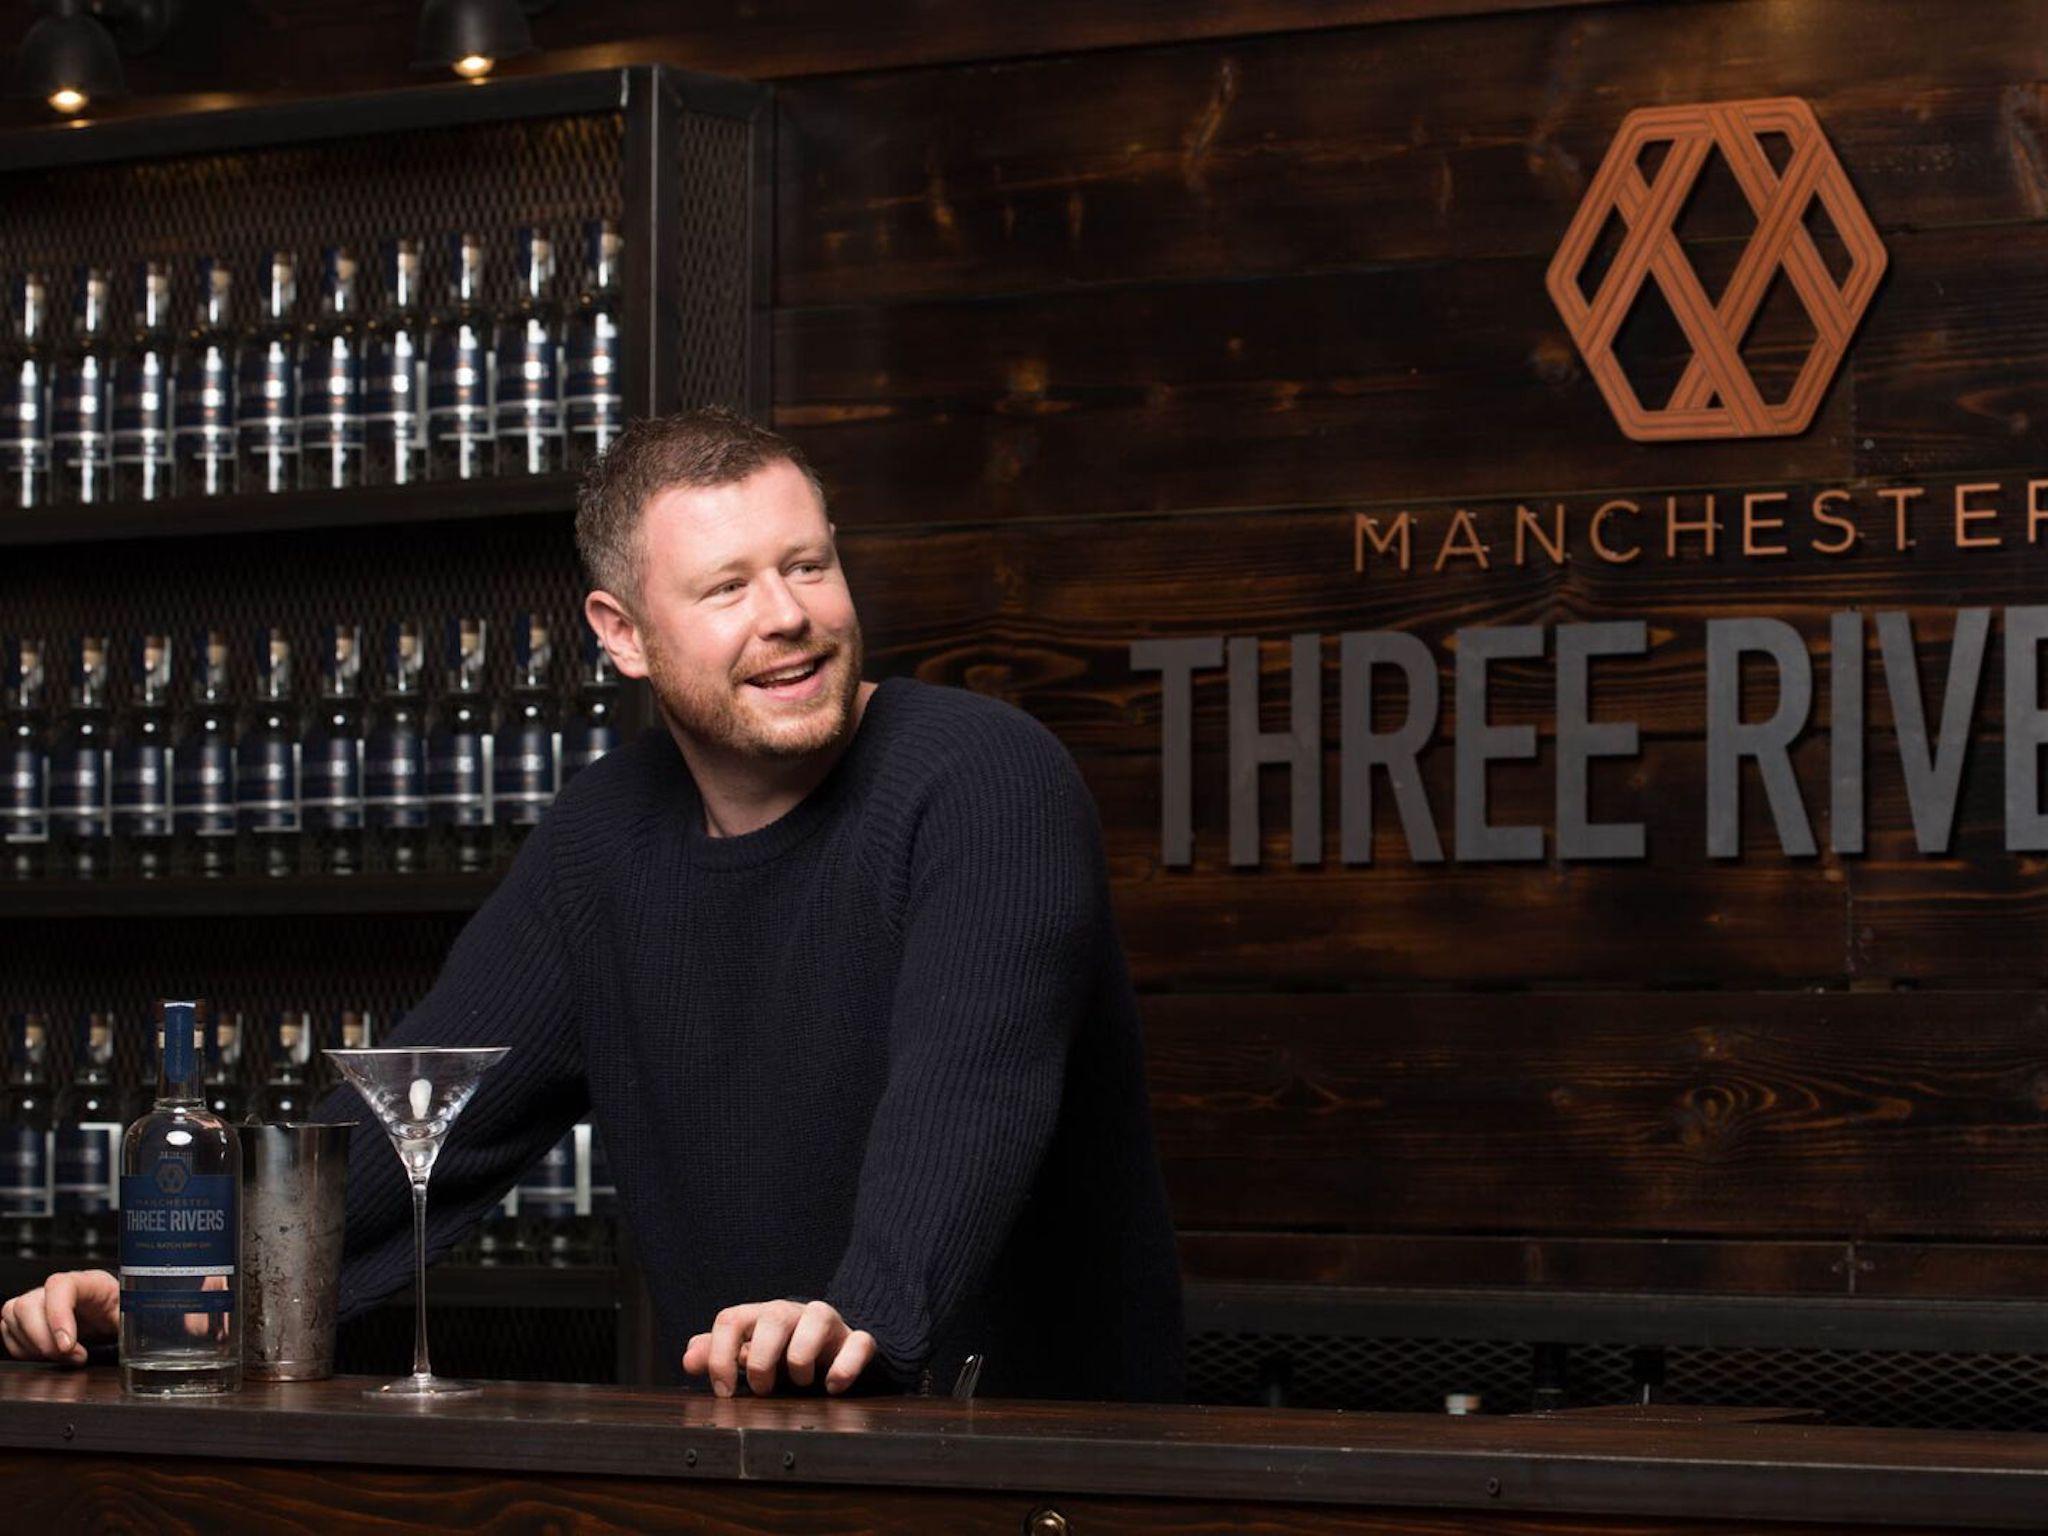 Dave Rigby spent two years looking for the perfect place to start a gin distillery in Manchester before he found the railway arch in Redbank